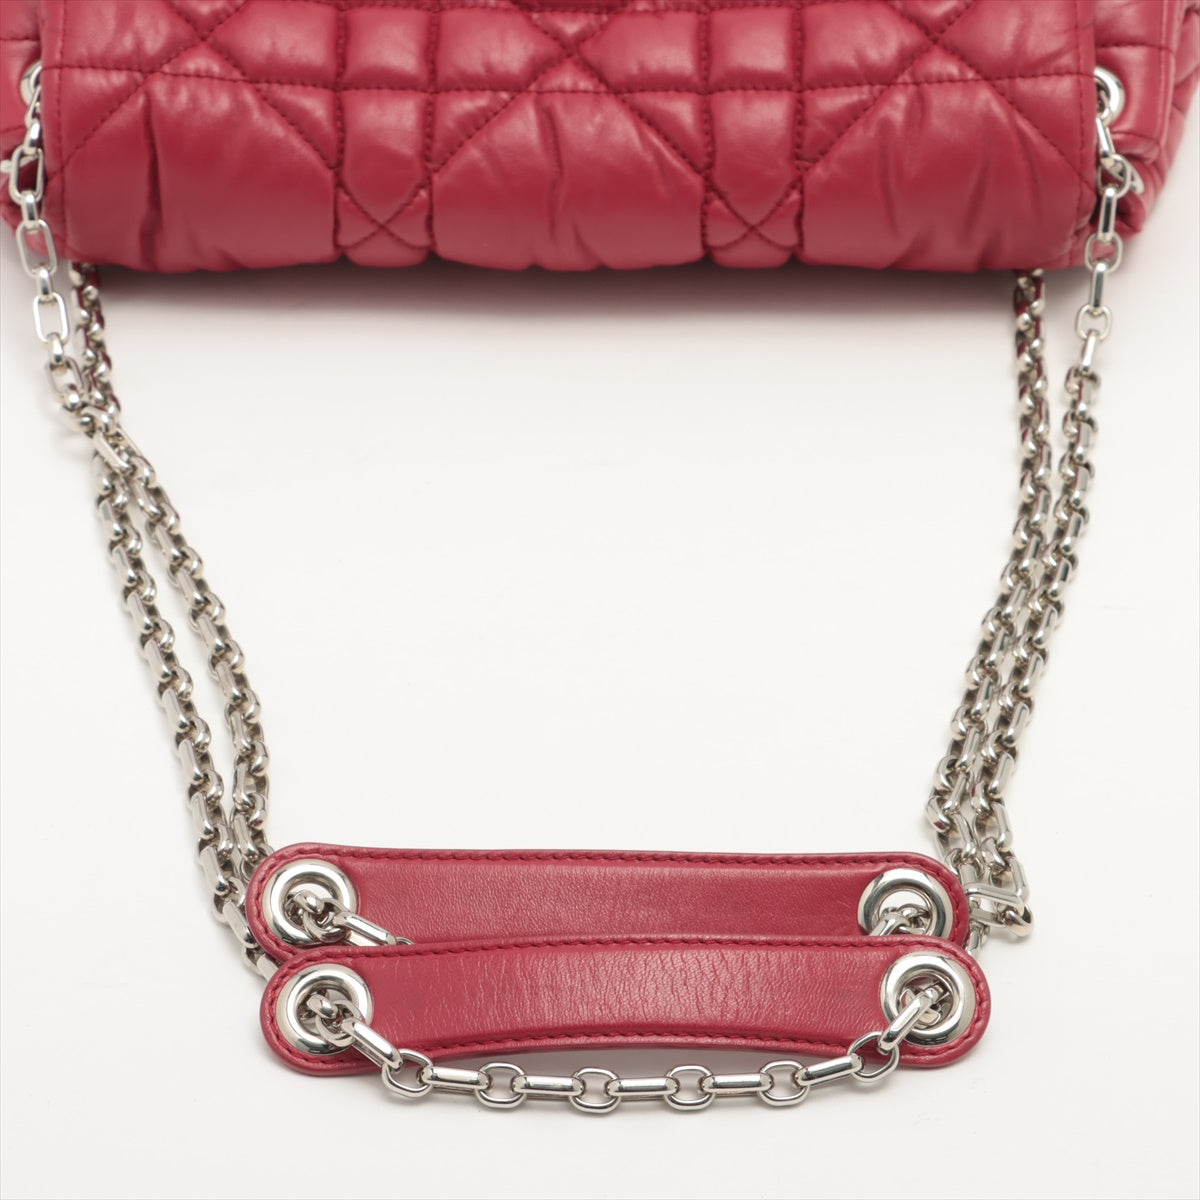 Christian Dior Leather Chain shoulder bag Red